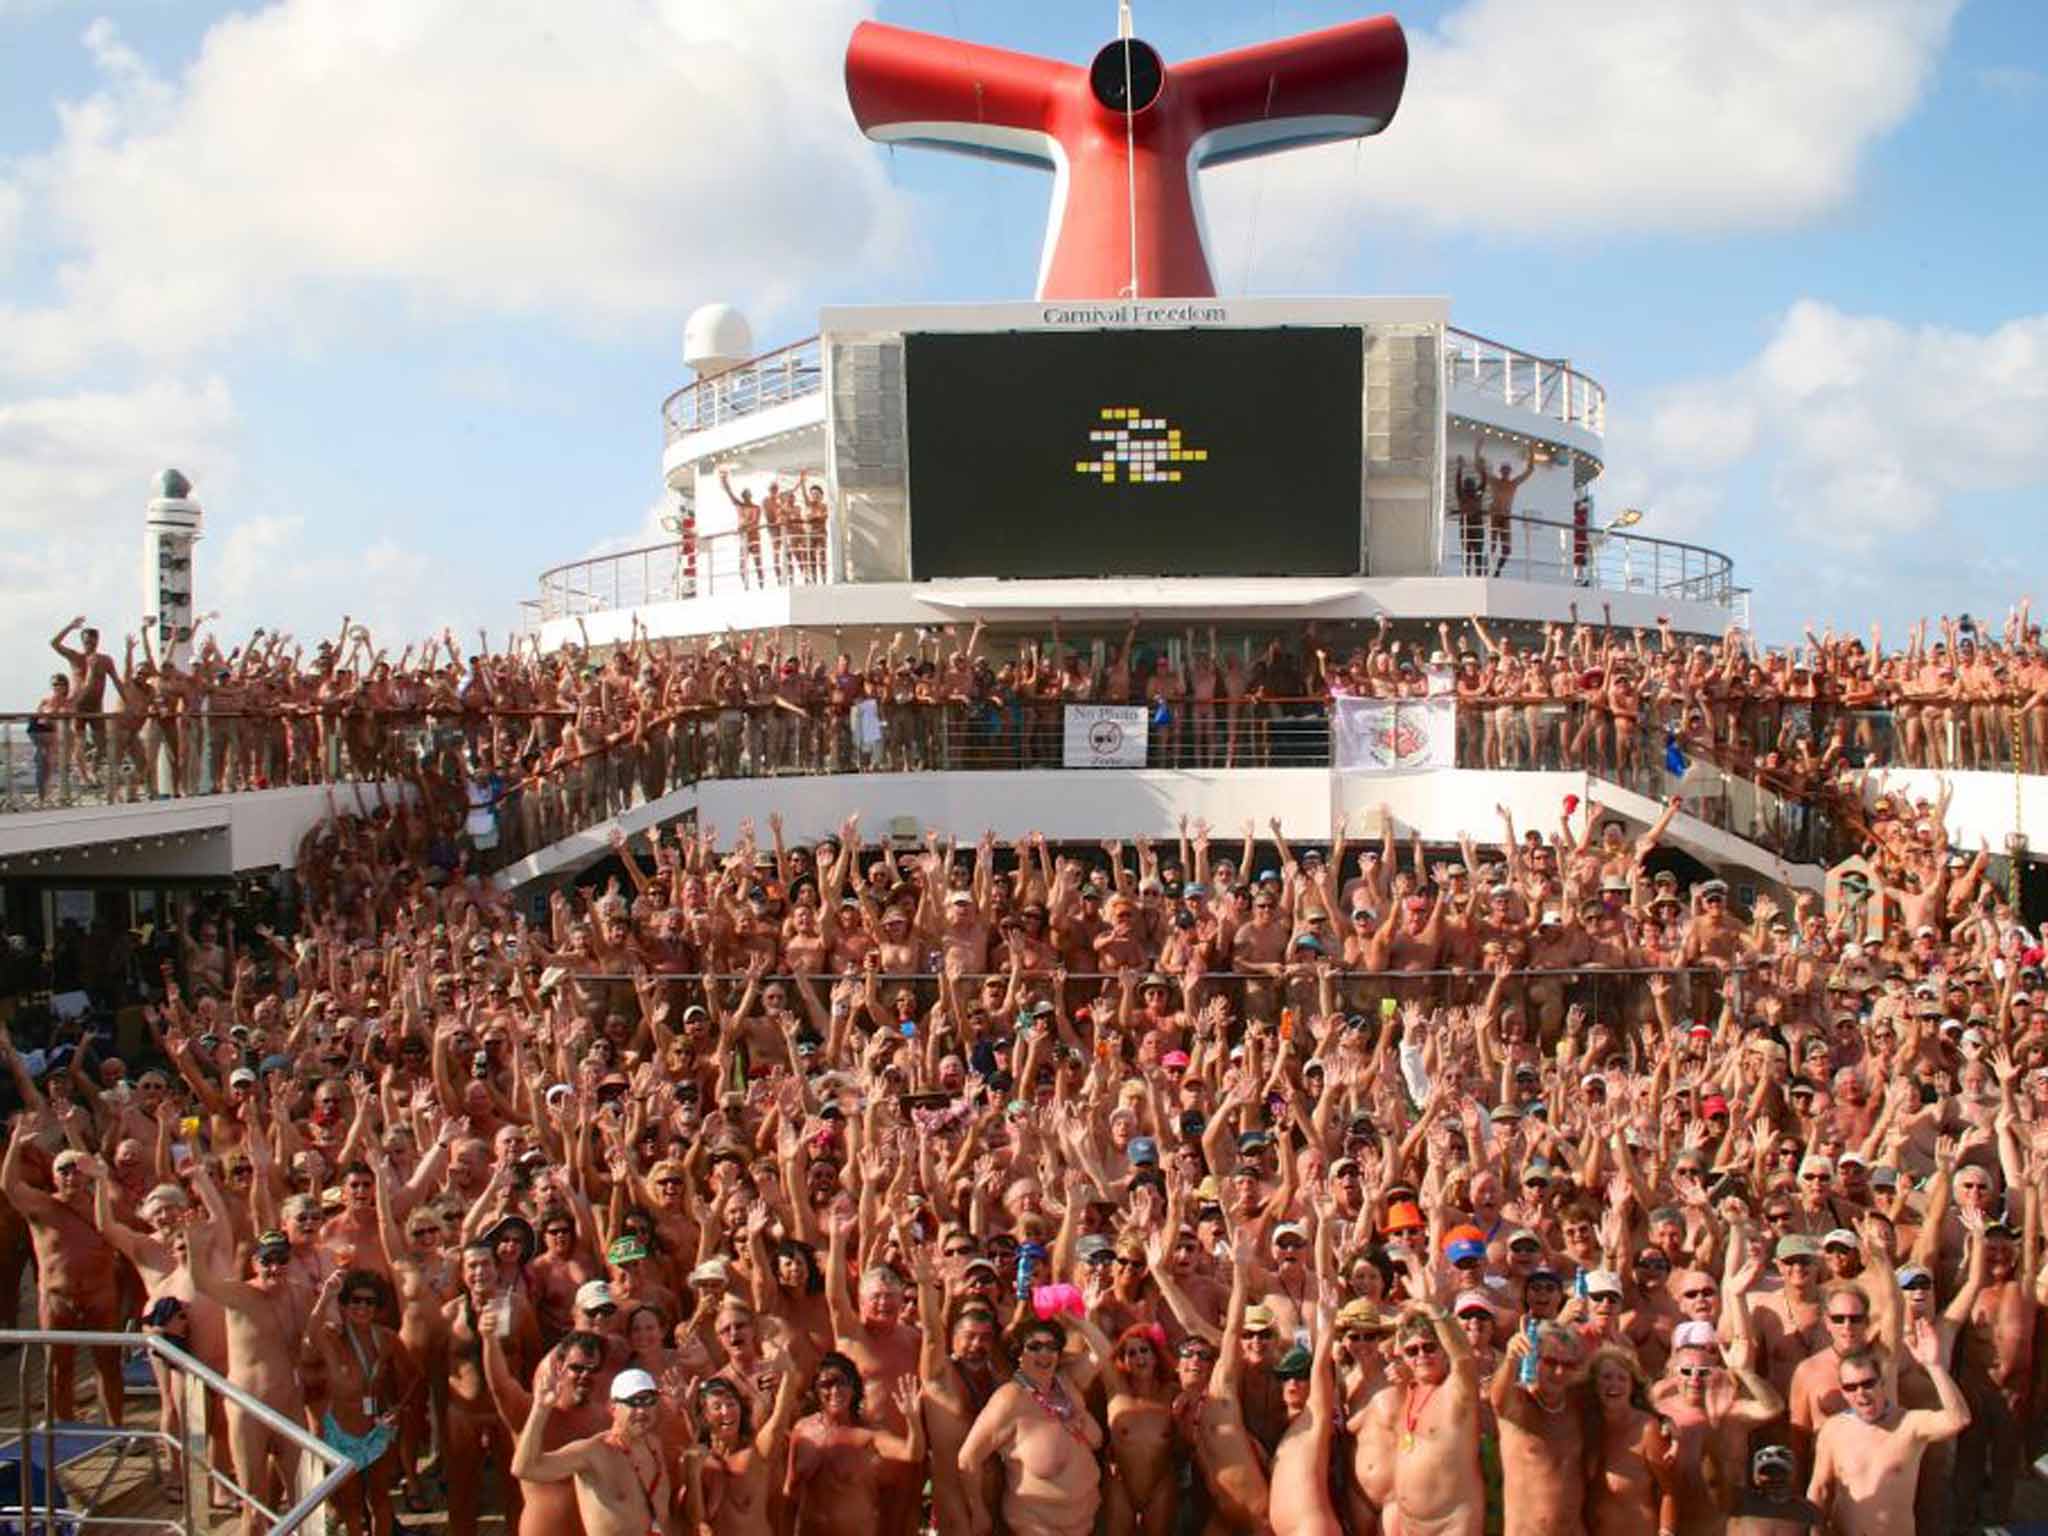 Naturist Nudist Mature - Nudist cruise ship: What's it like on a boat with 2,000 ...